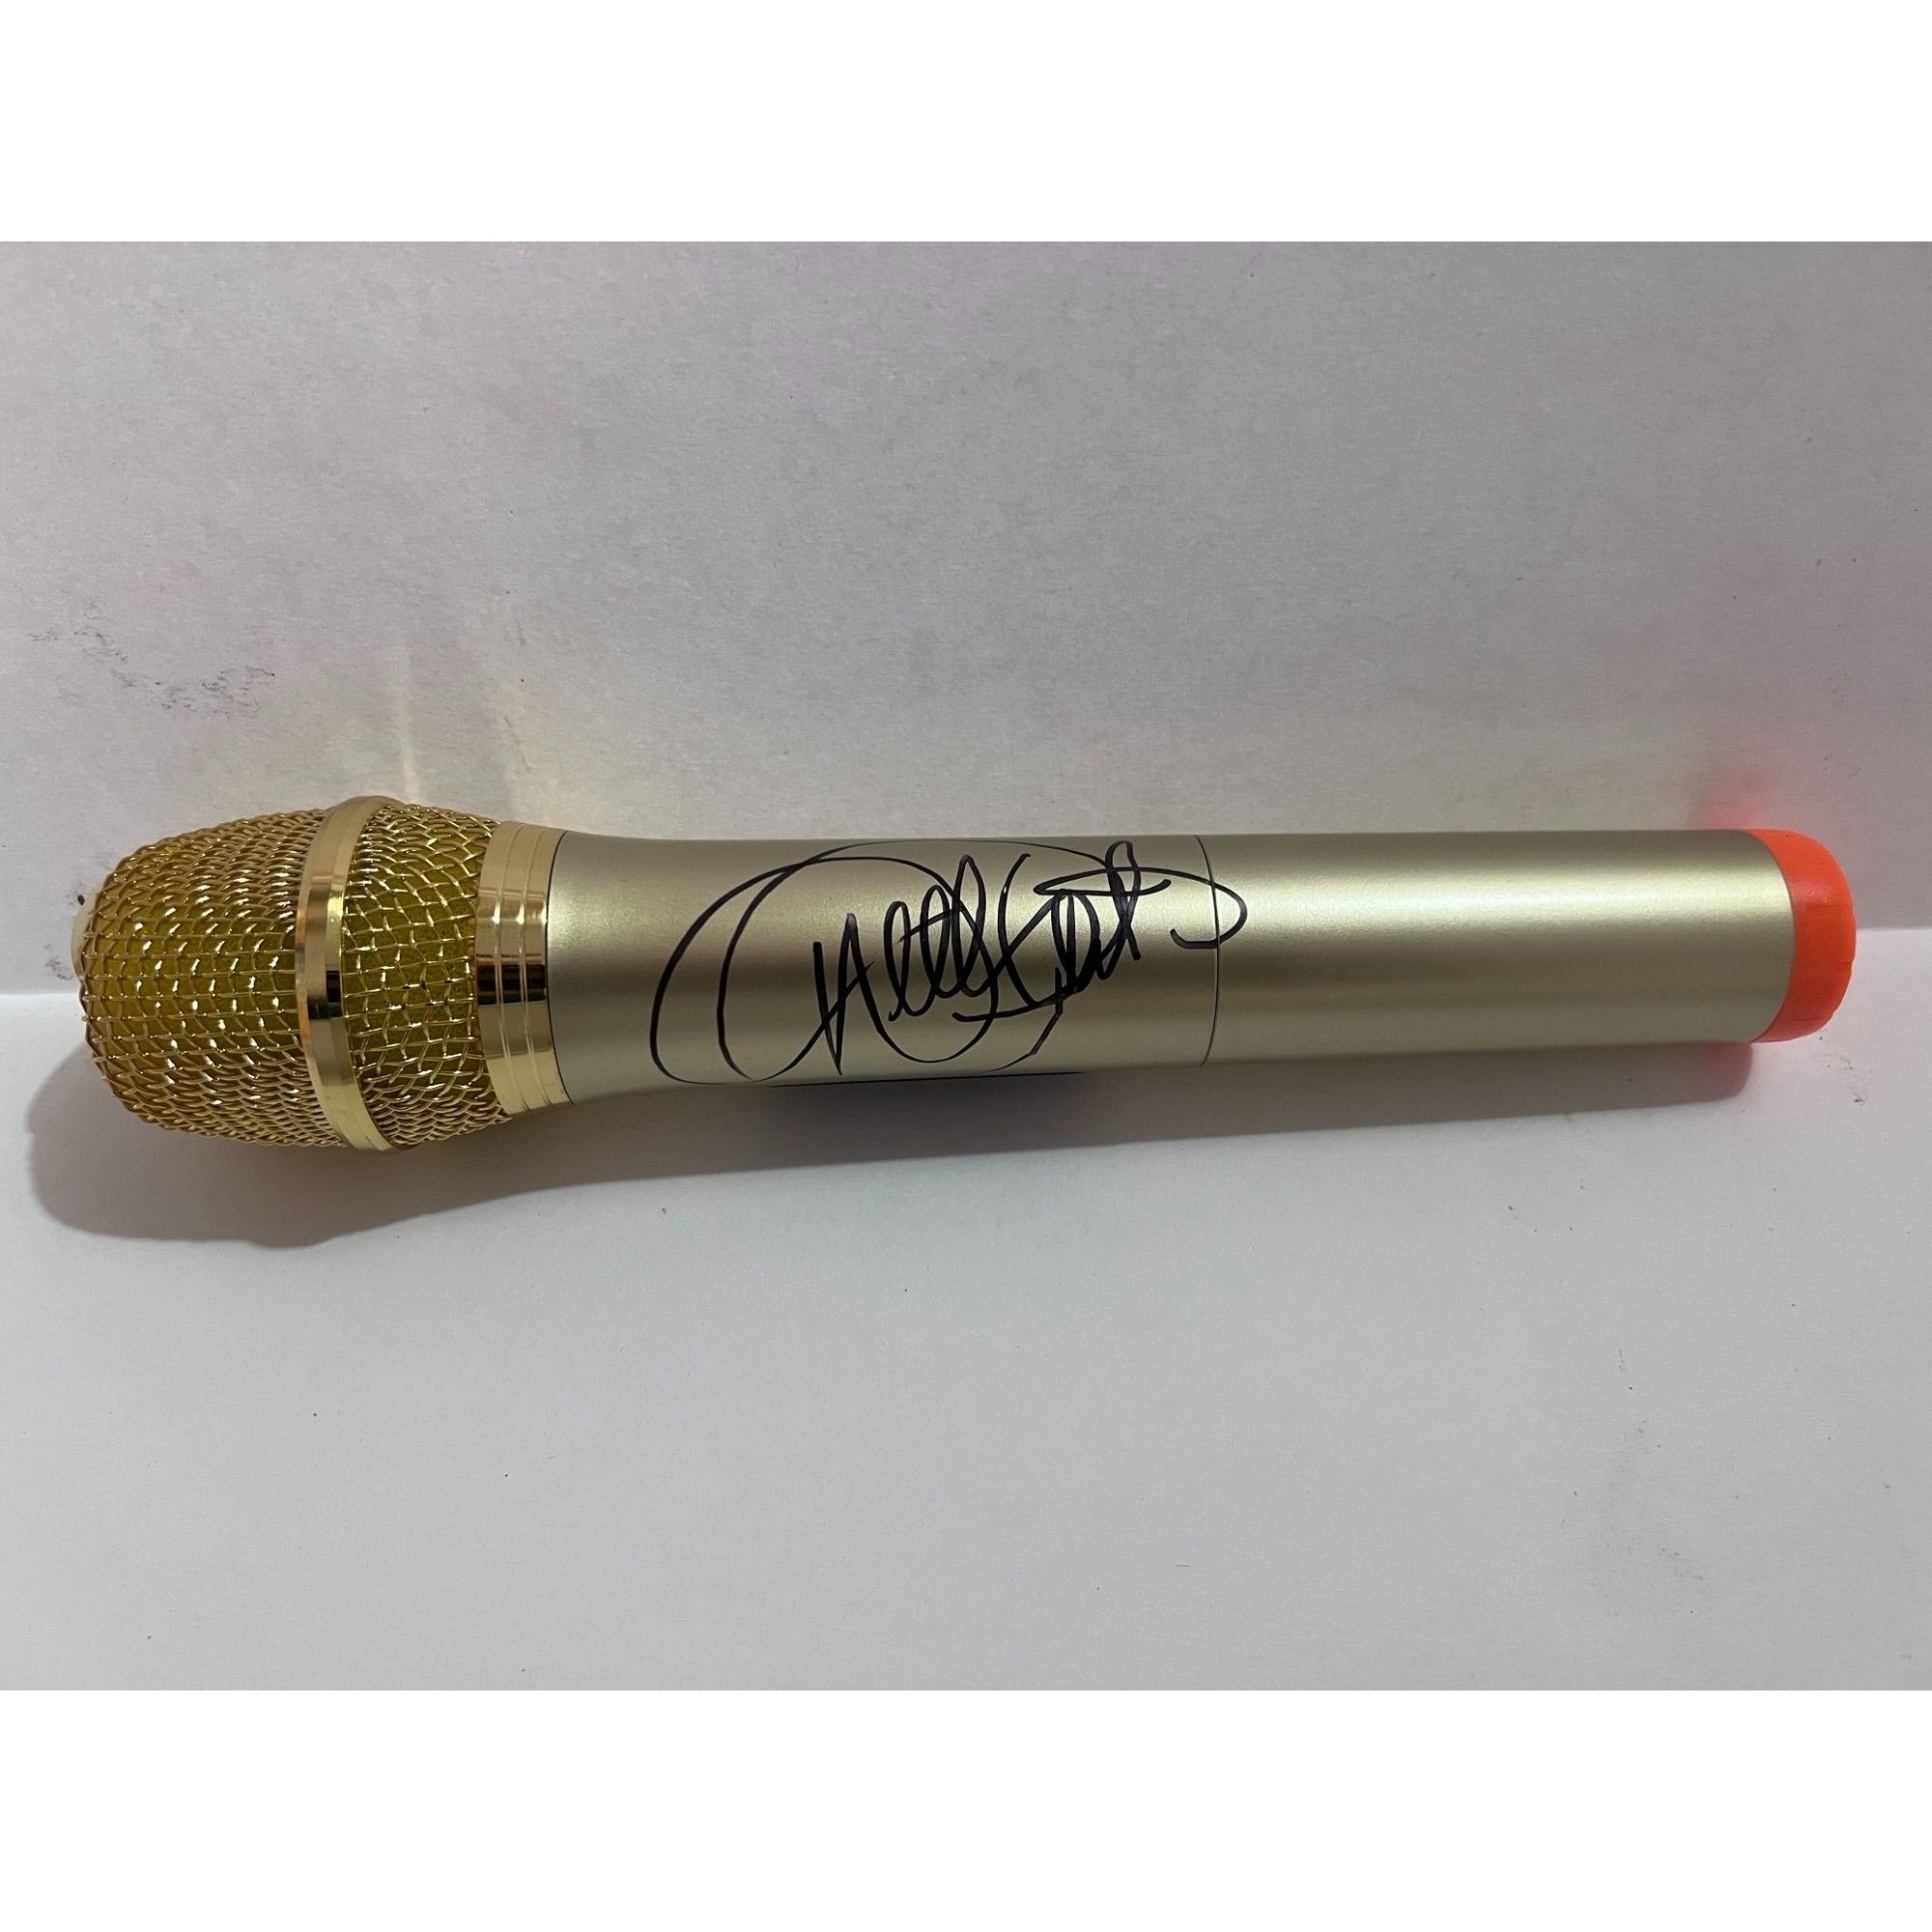 Dolly Parton gold full size microphone signed with proof